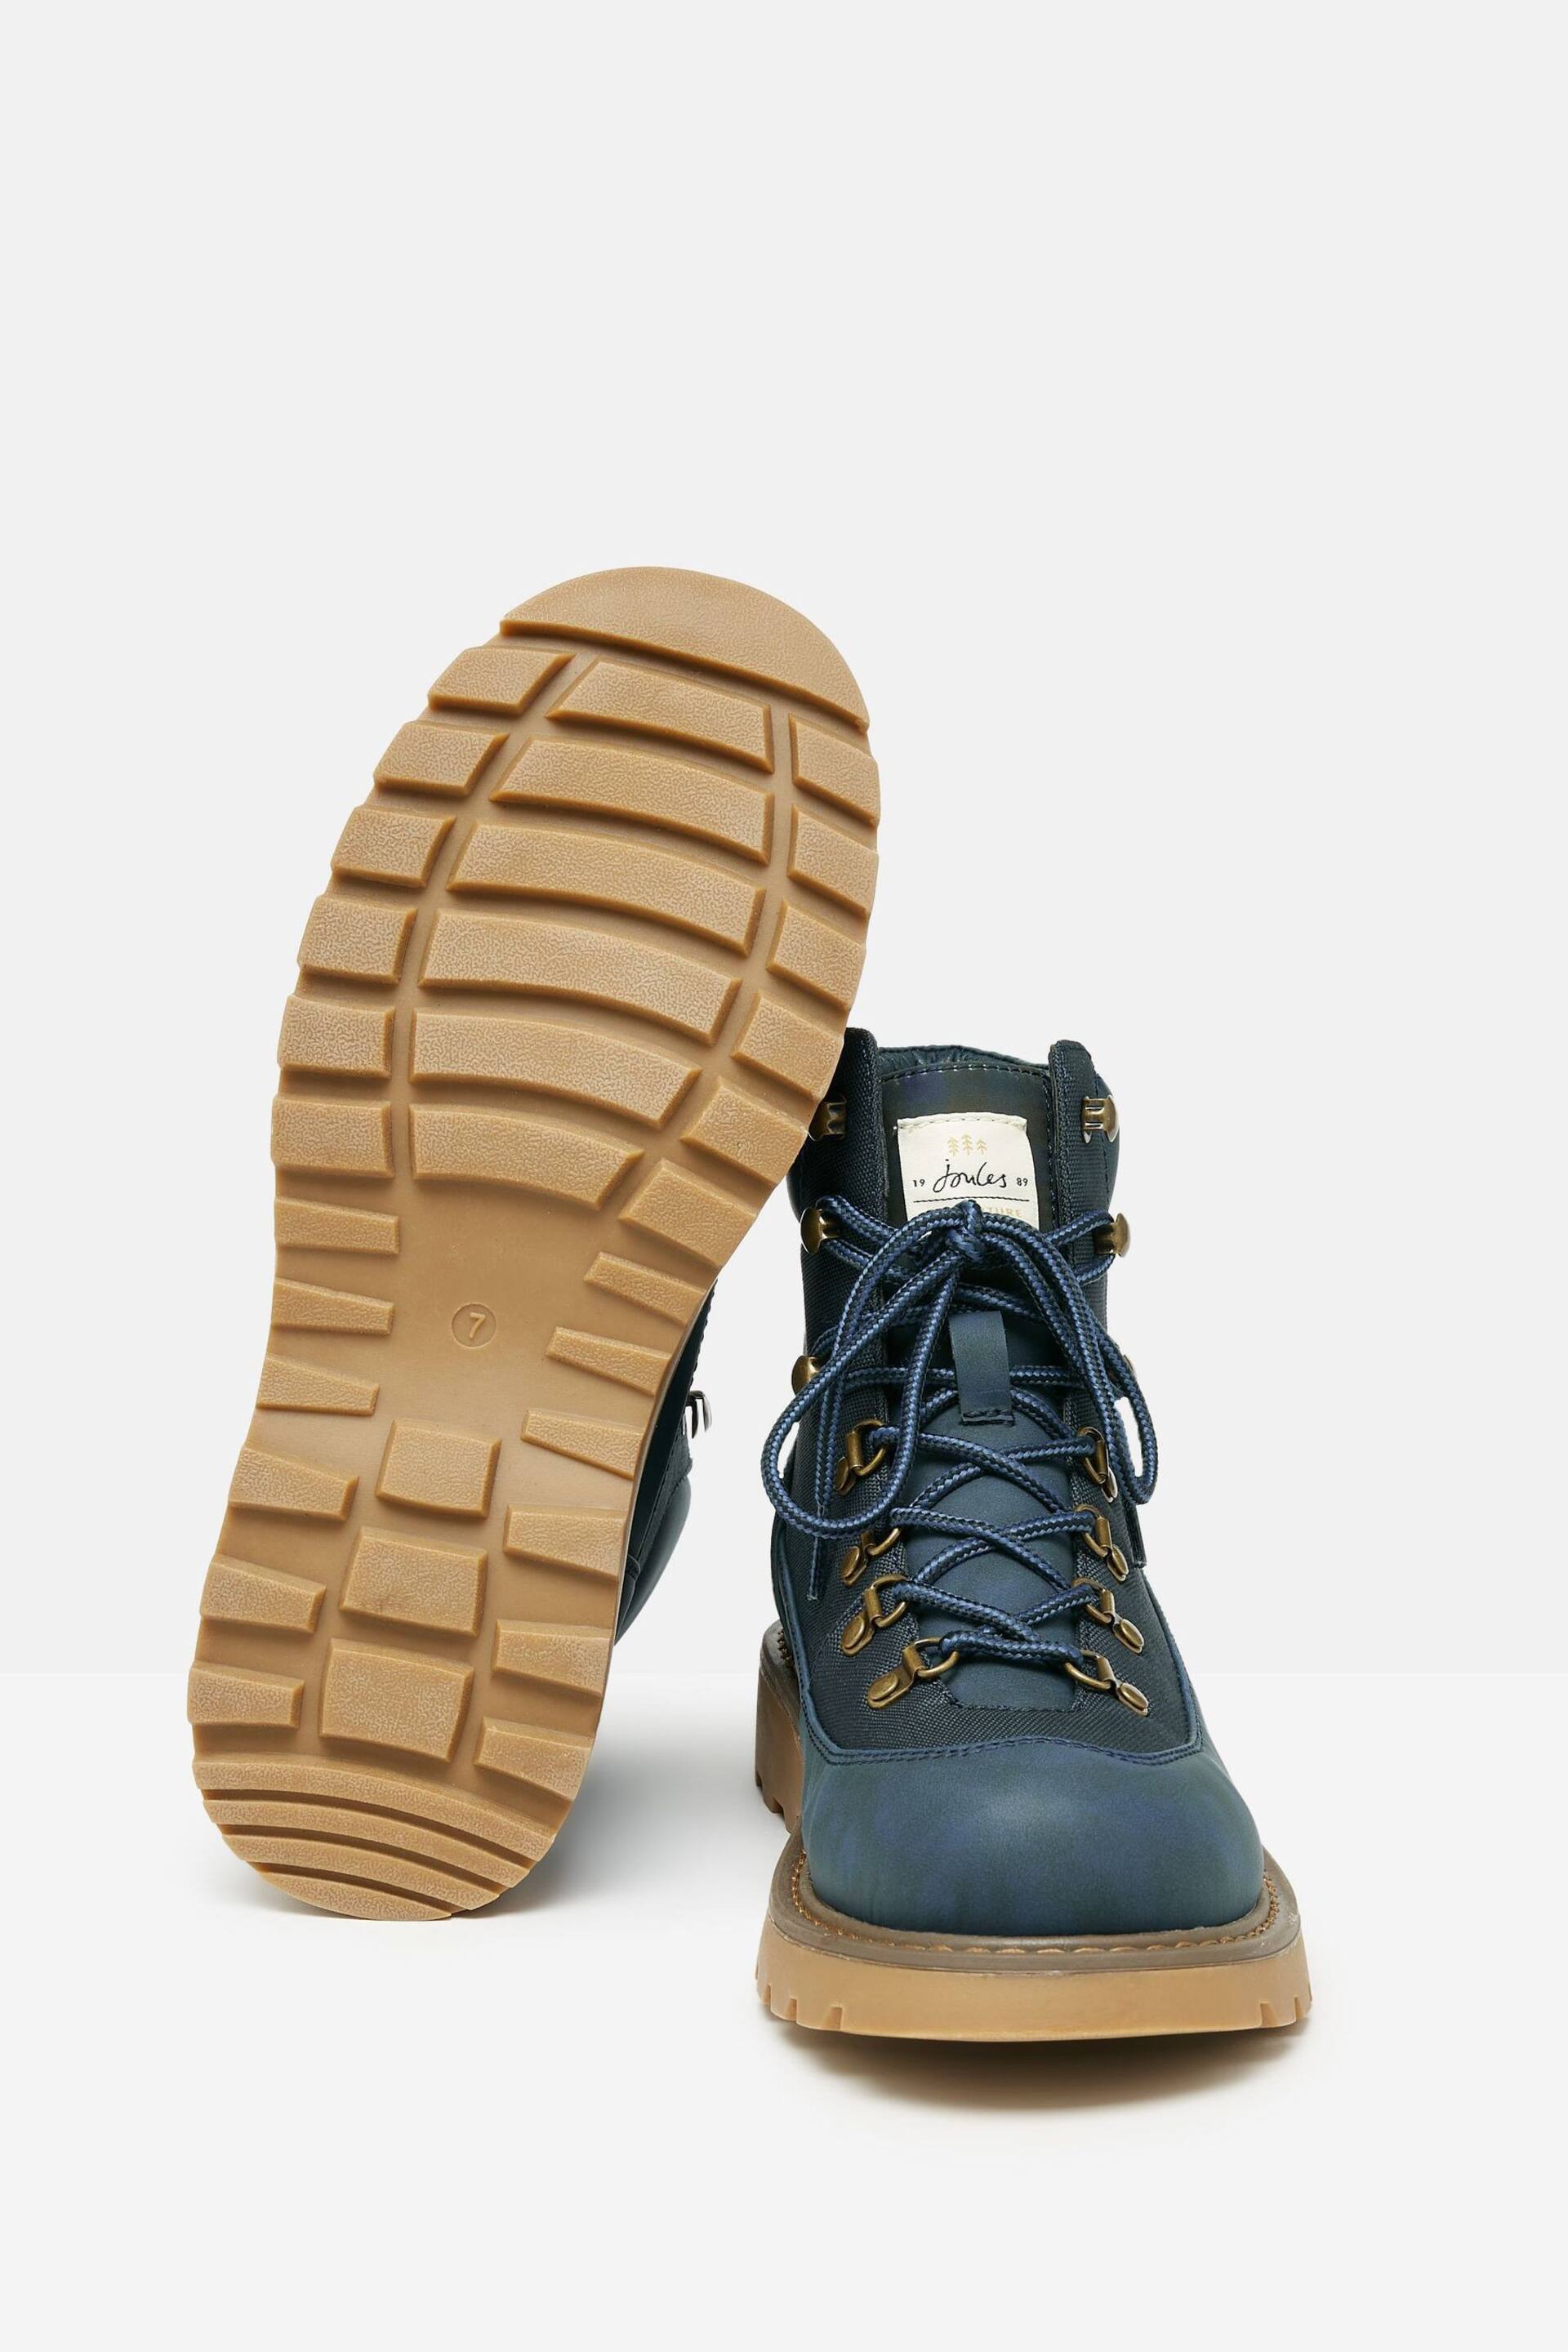 Joules Kendall Navy Lace-Up Boots - Image 4 of 8